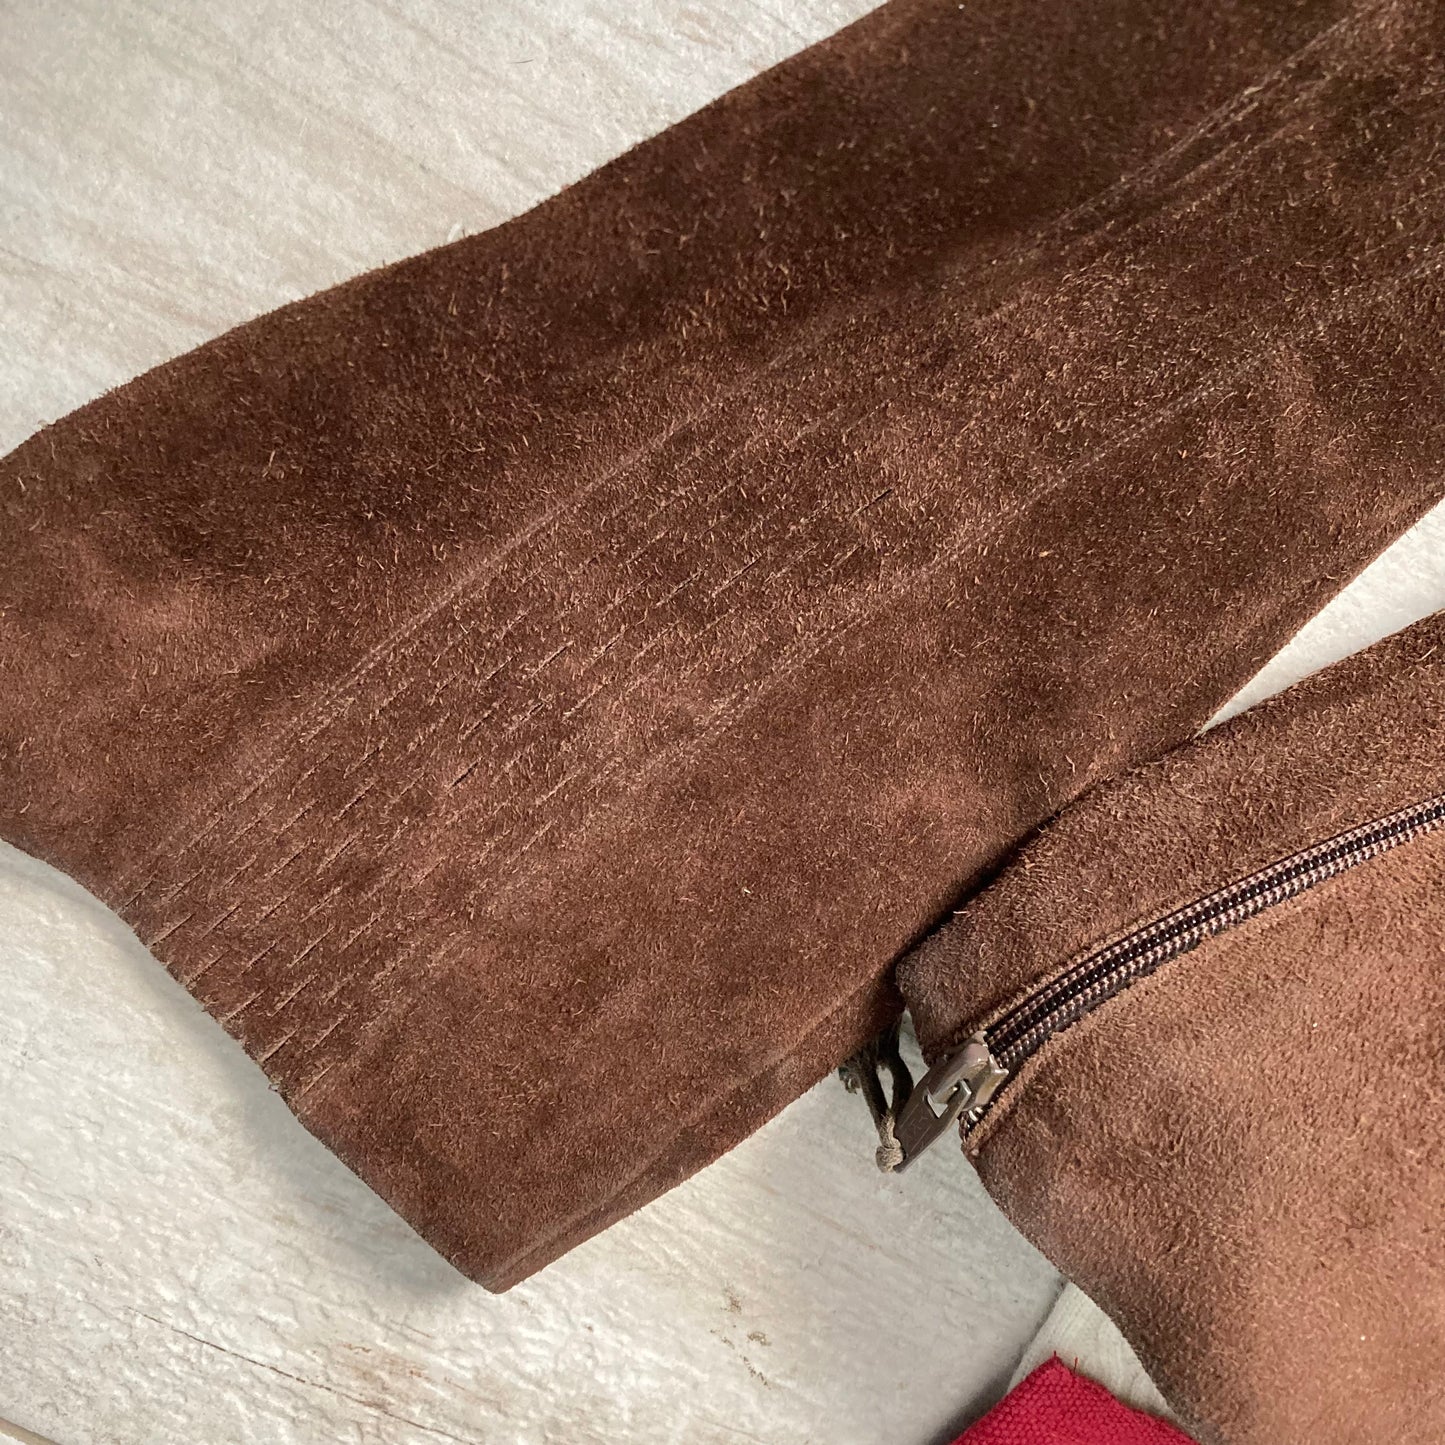 1970s Chocolate Brown Suede Boots, size 10 AAA